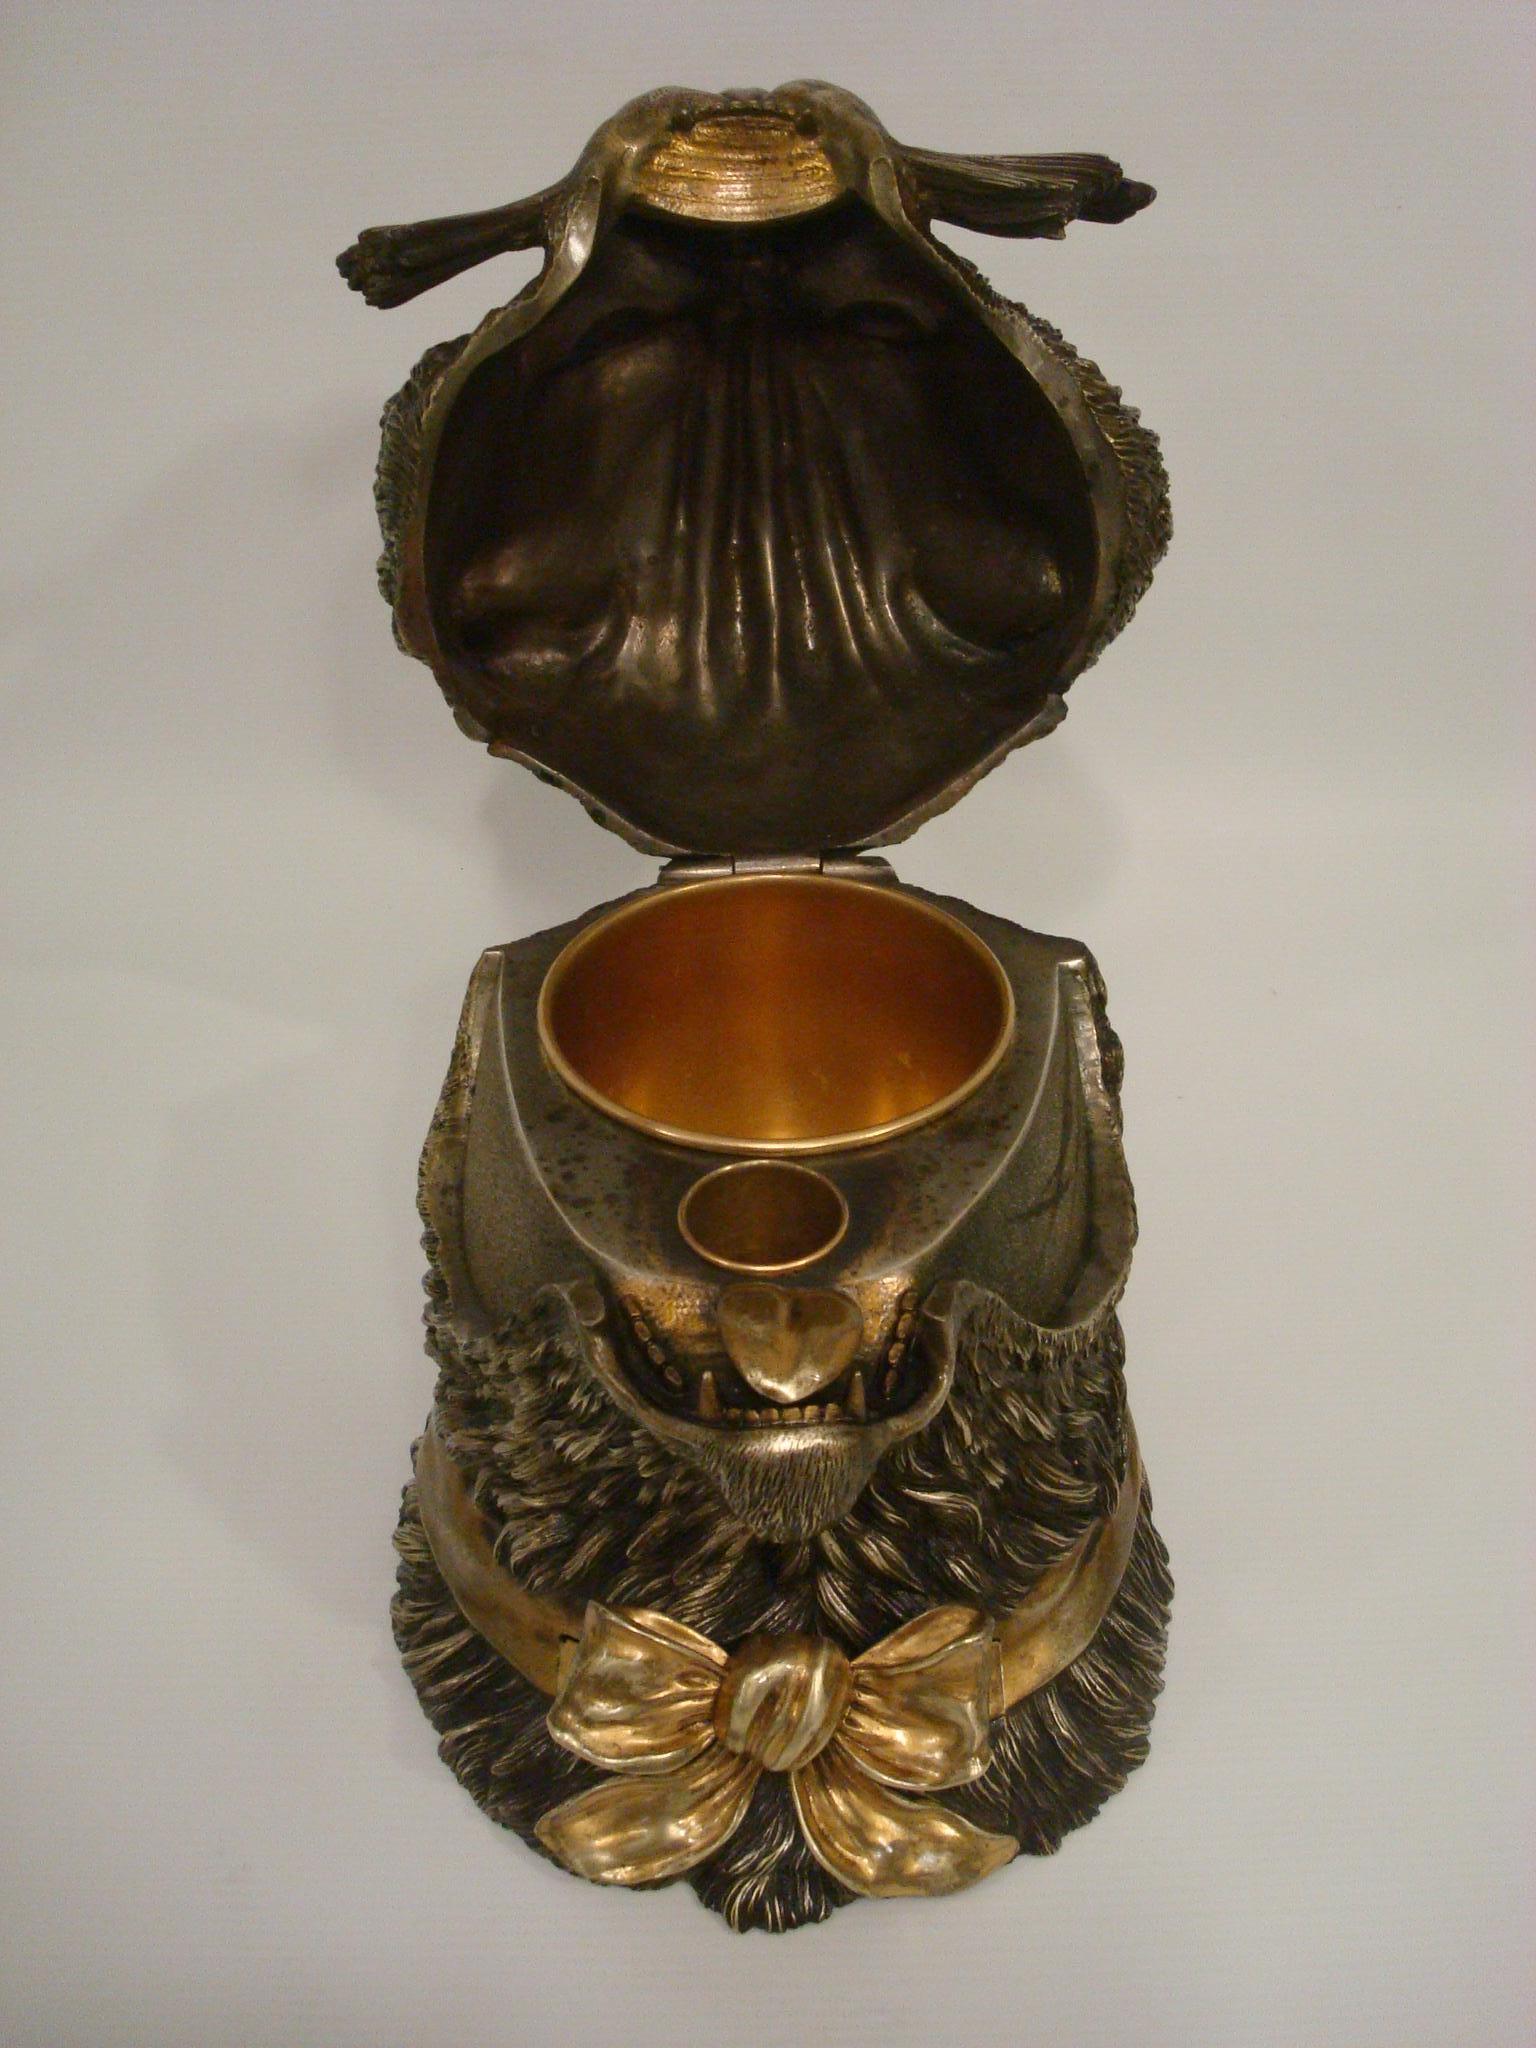 Silvered Novelty Bronze Cigars / Cigarettes Humidor Formed as a Cat's Head Sculpture For Sale